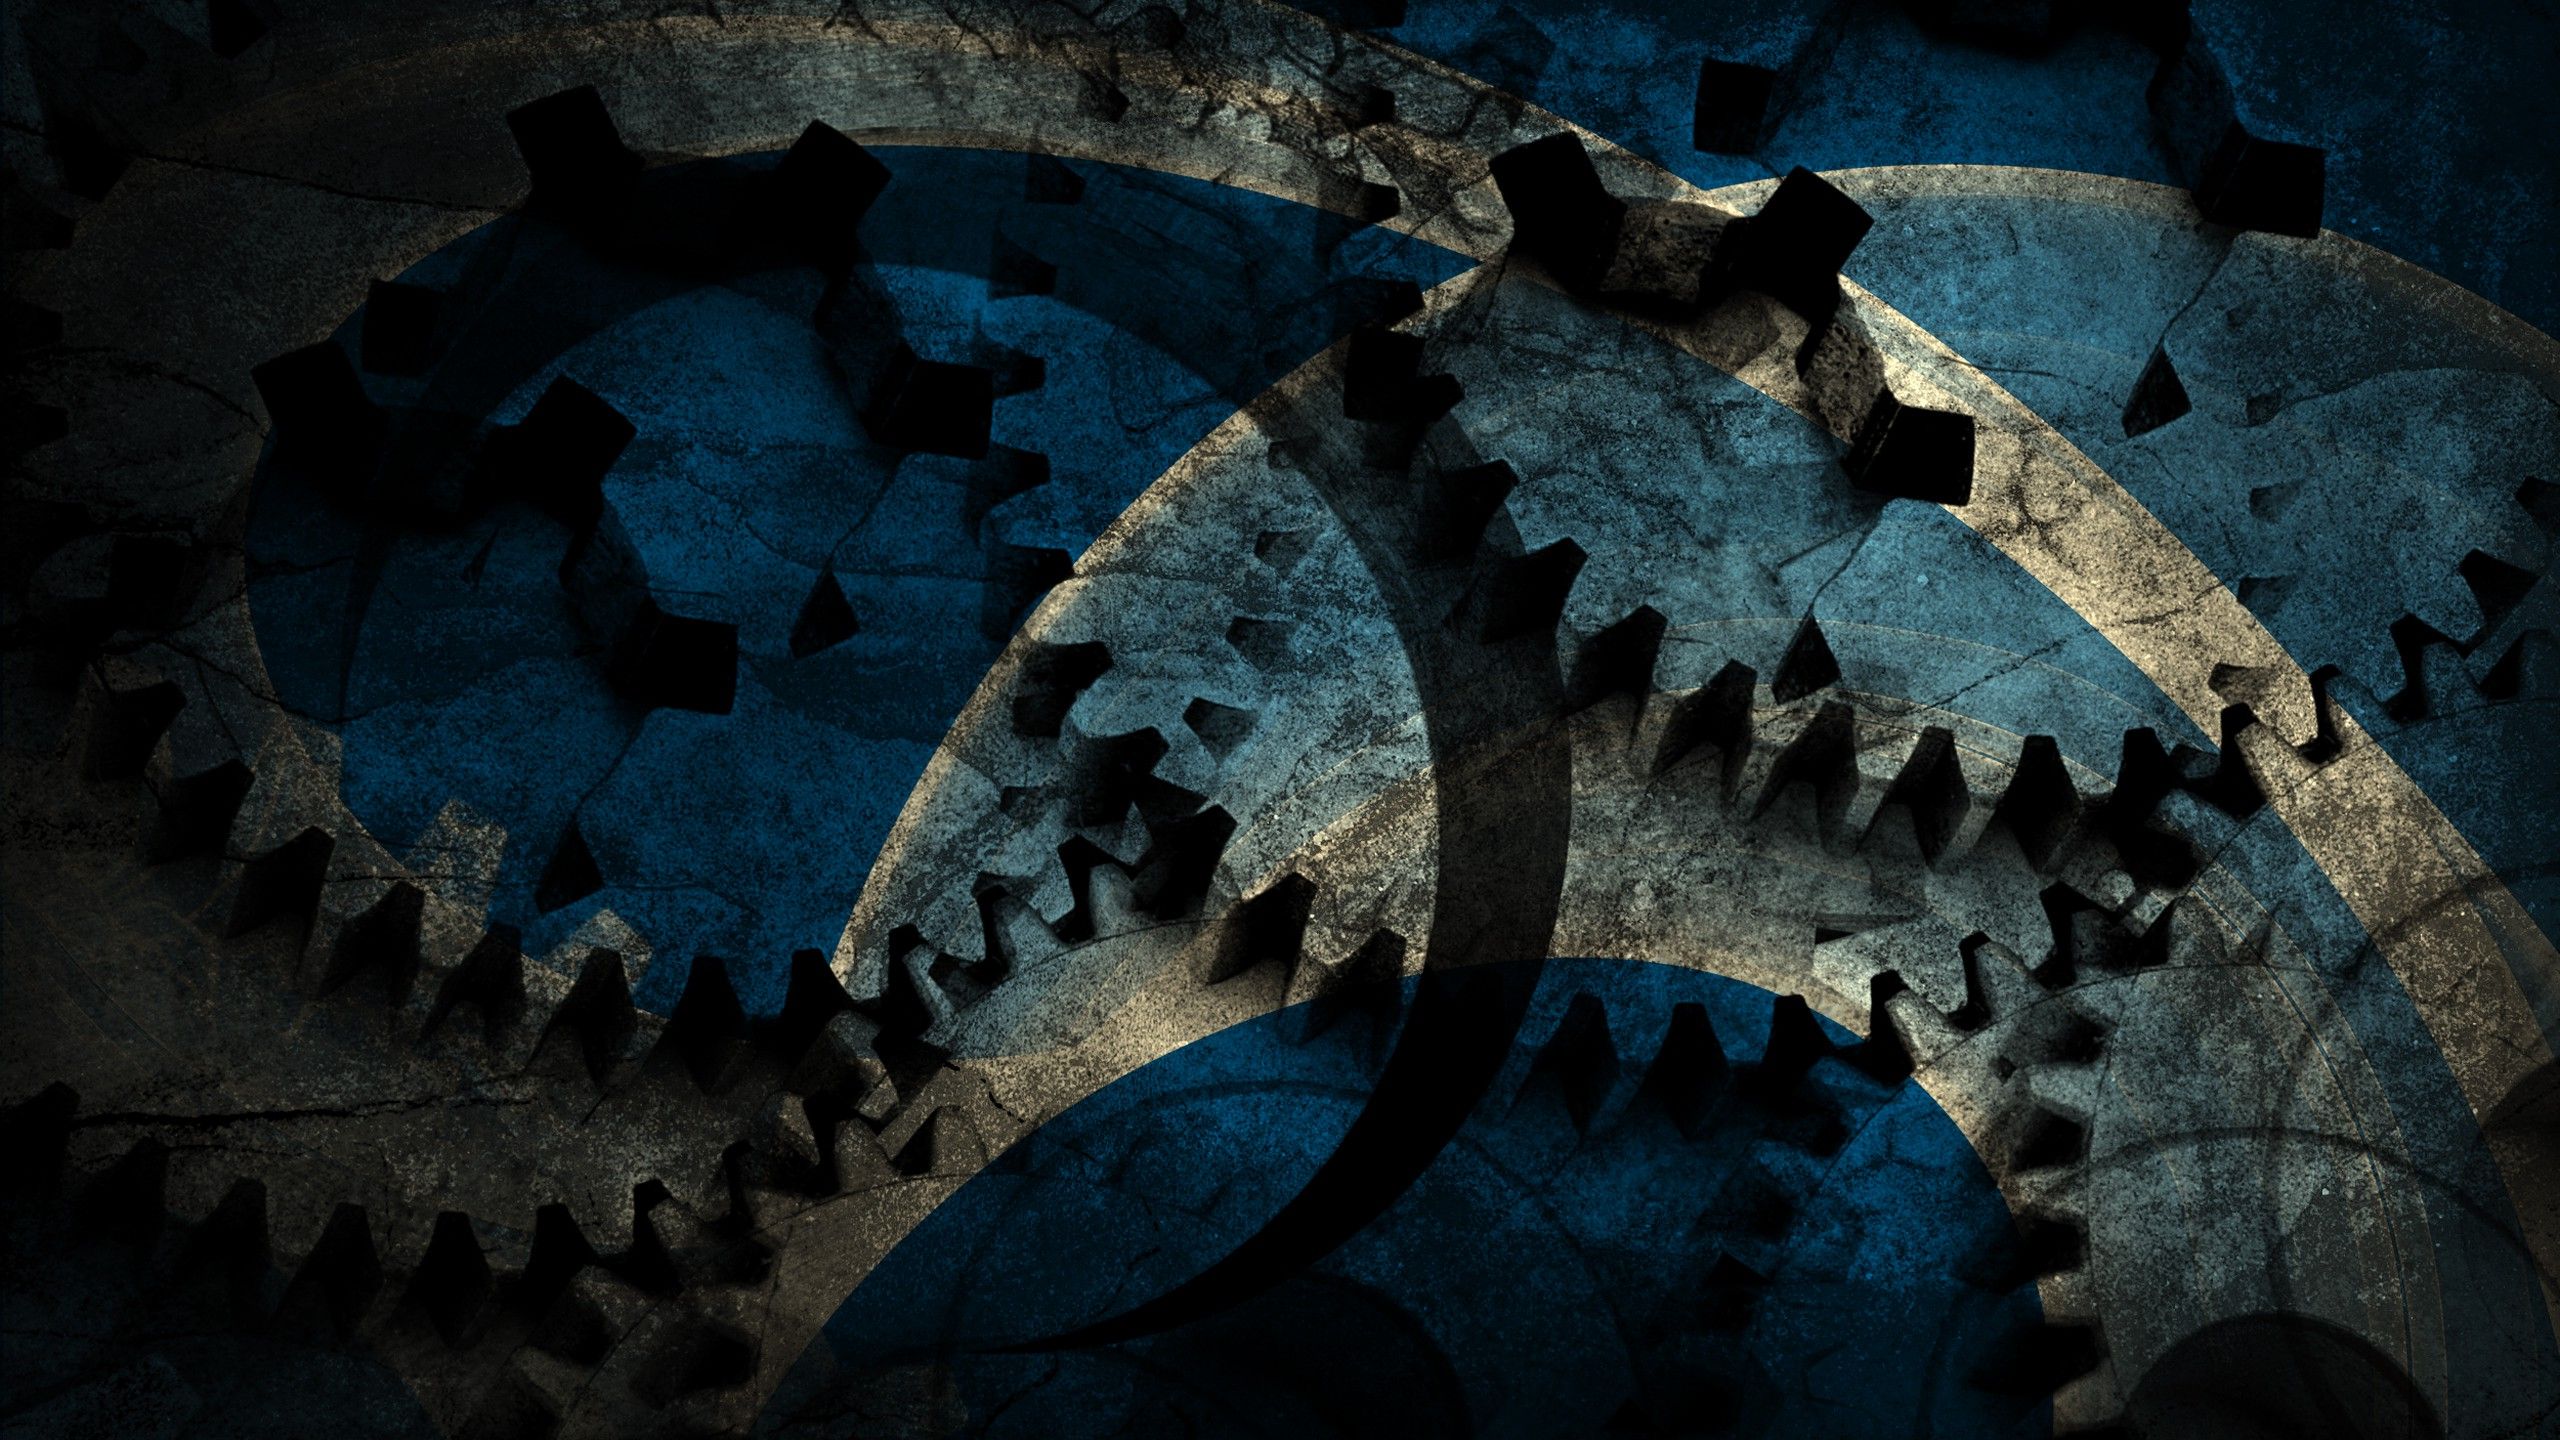 gears, Machine, Abstract, Grunge Wallpaper HD / Desktop and Mobile Background